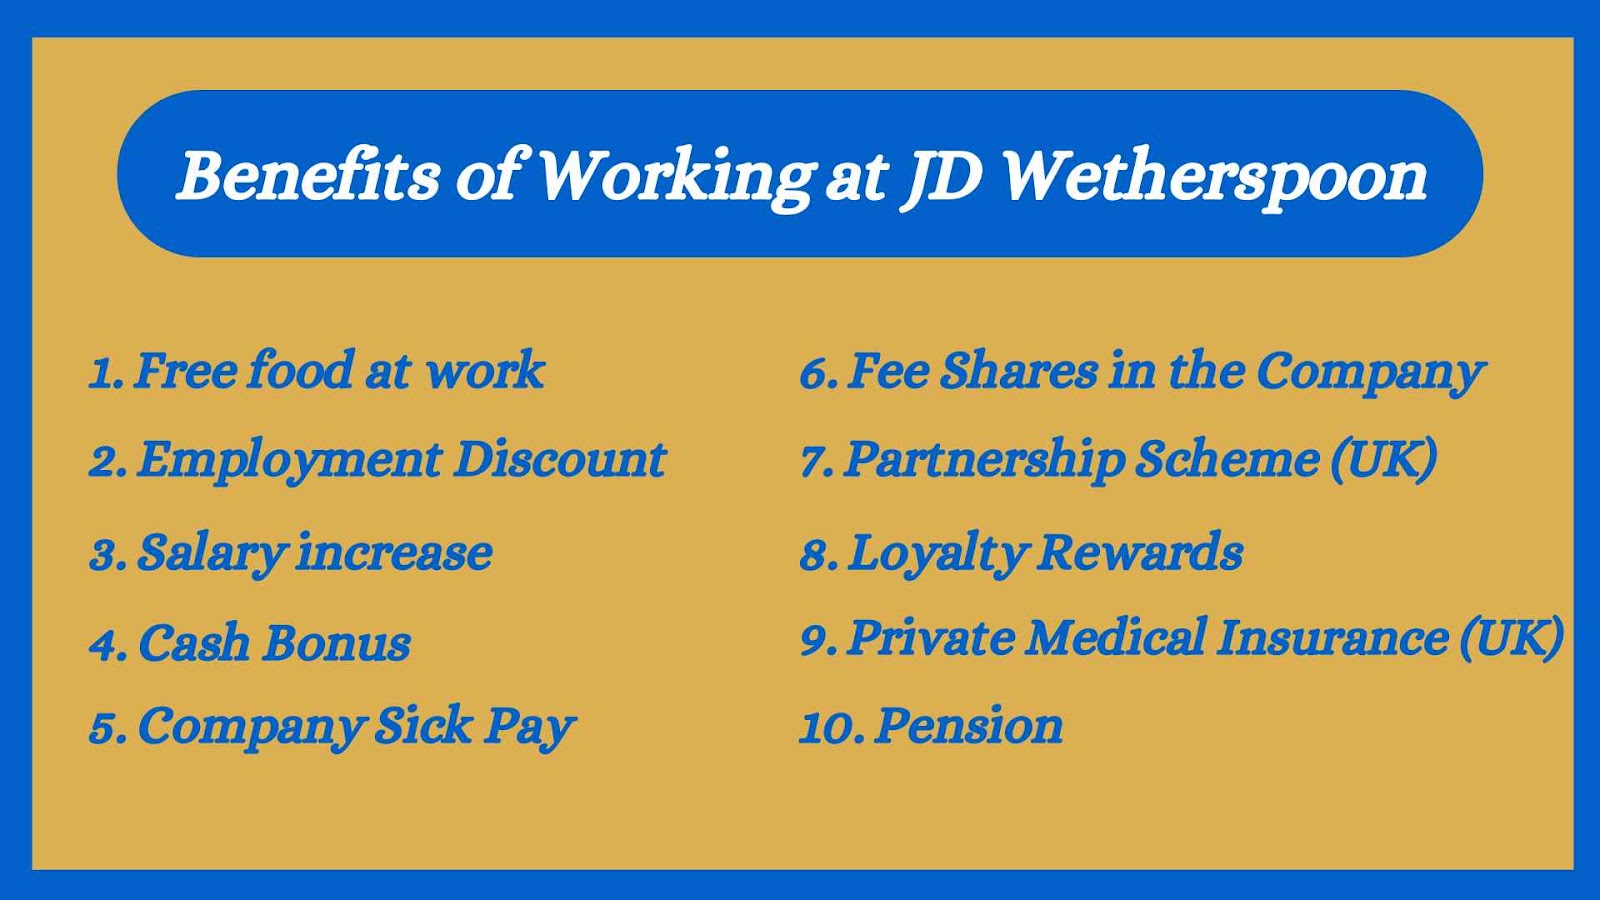 What are the benefits of working at J D Wetherspoon?